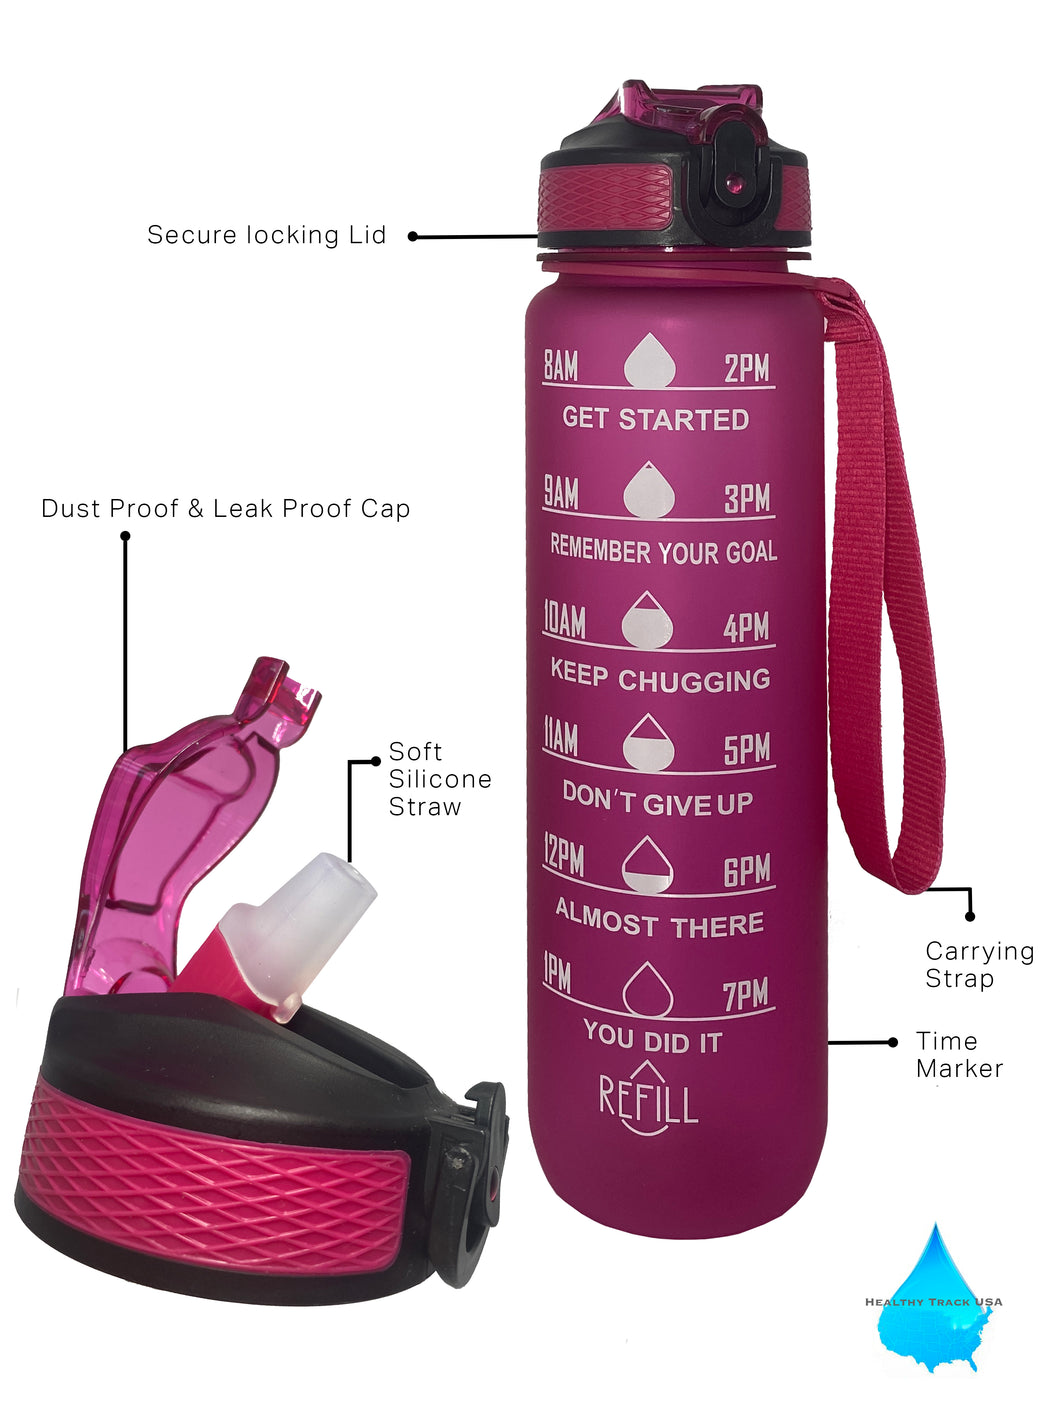 32 Oz Inspirational Time Water Bottle with Hydrating Reminder Tracker. Motivational Outdoor Sport Water Bottle. BPA Free, Color Pink